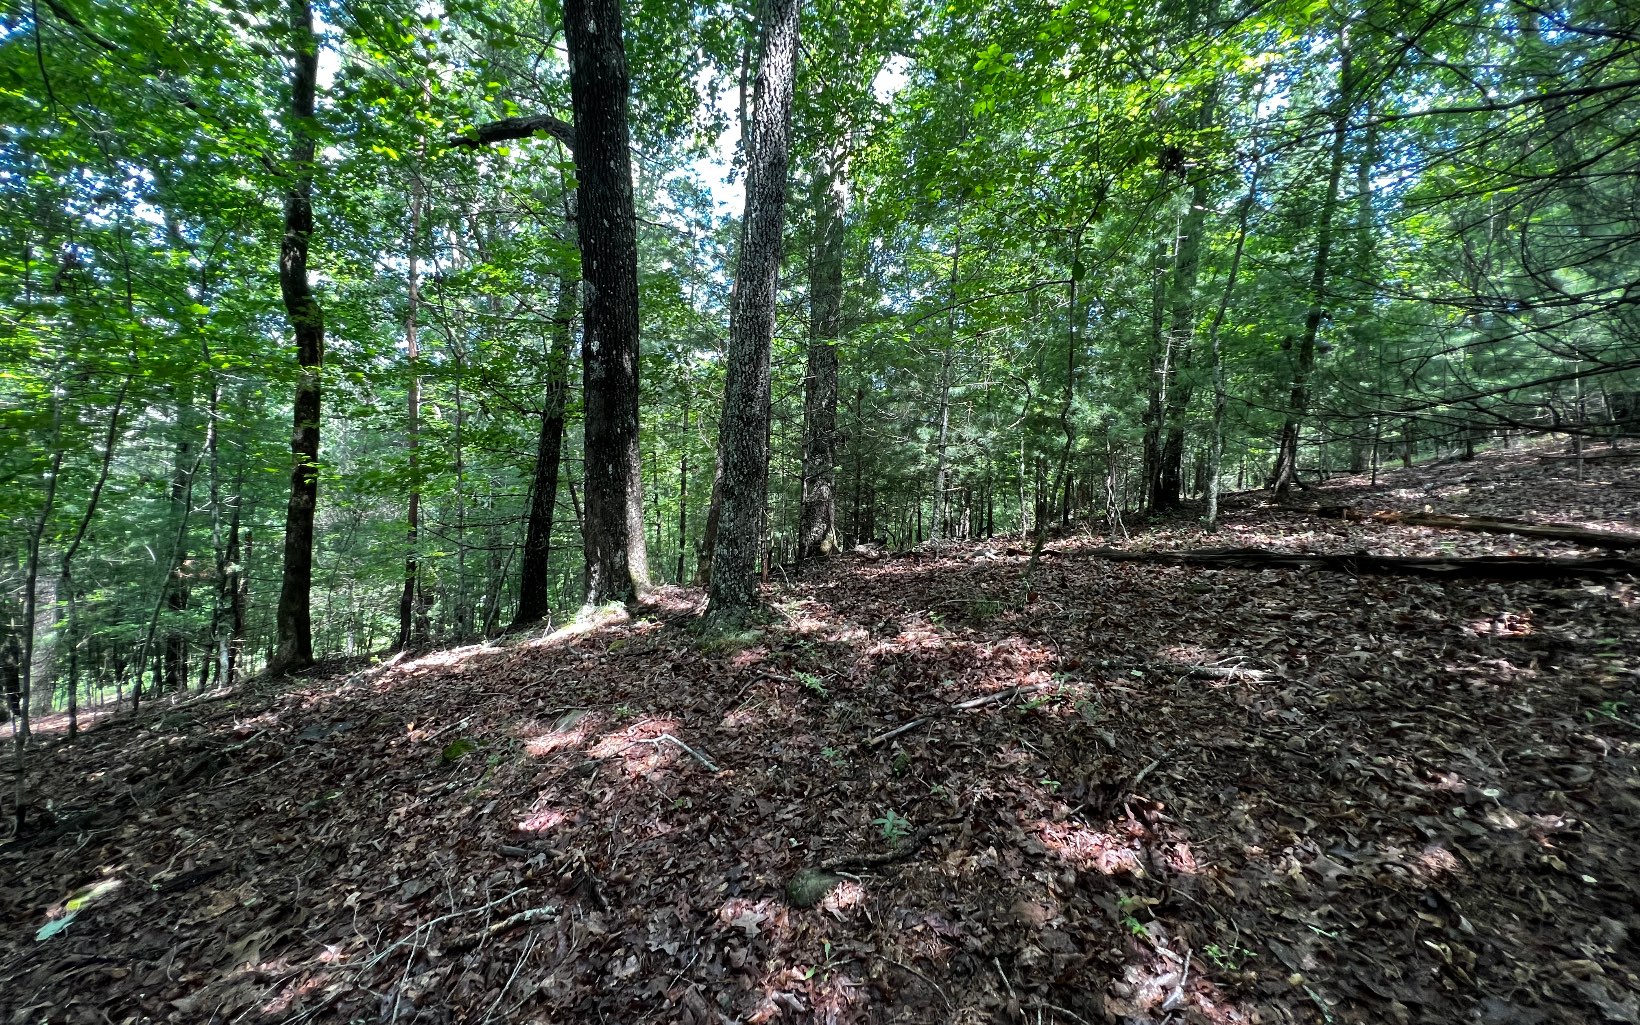 Bring your builder and cabin plans to this beautiful 3.3 acre, unrestricted tract. Located just off Old Dial Rd on a paved, private drive and with the sounds of Buckeye Branch and the rushing Wilscot Creek down below. This lot has a gentle slope to it but with plenty of flat building sites that are already somewhat cleared. You'll find mostly hardwoods on this property giving it that true woodsy, mountain feel, while watching the abundant wildlife stroll through. Located near the Aska Adventure Area, Lake Blue Ridge, and many more activities for those nature enthusiasts.